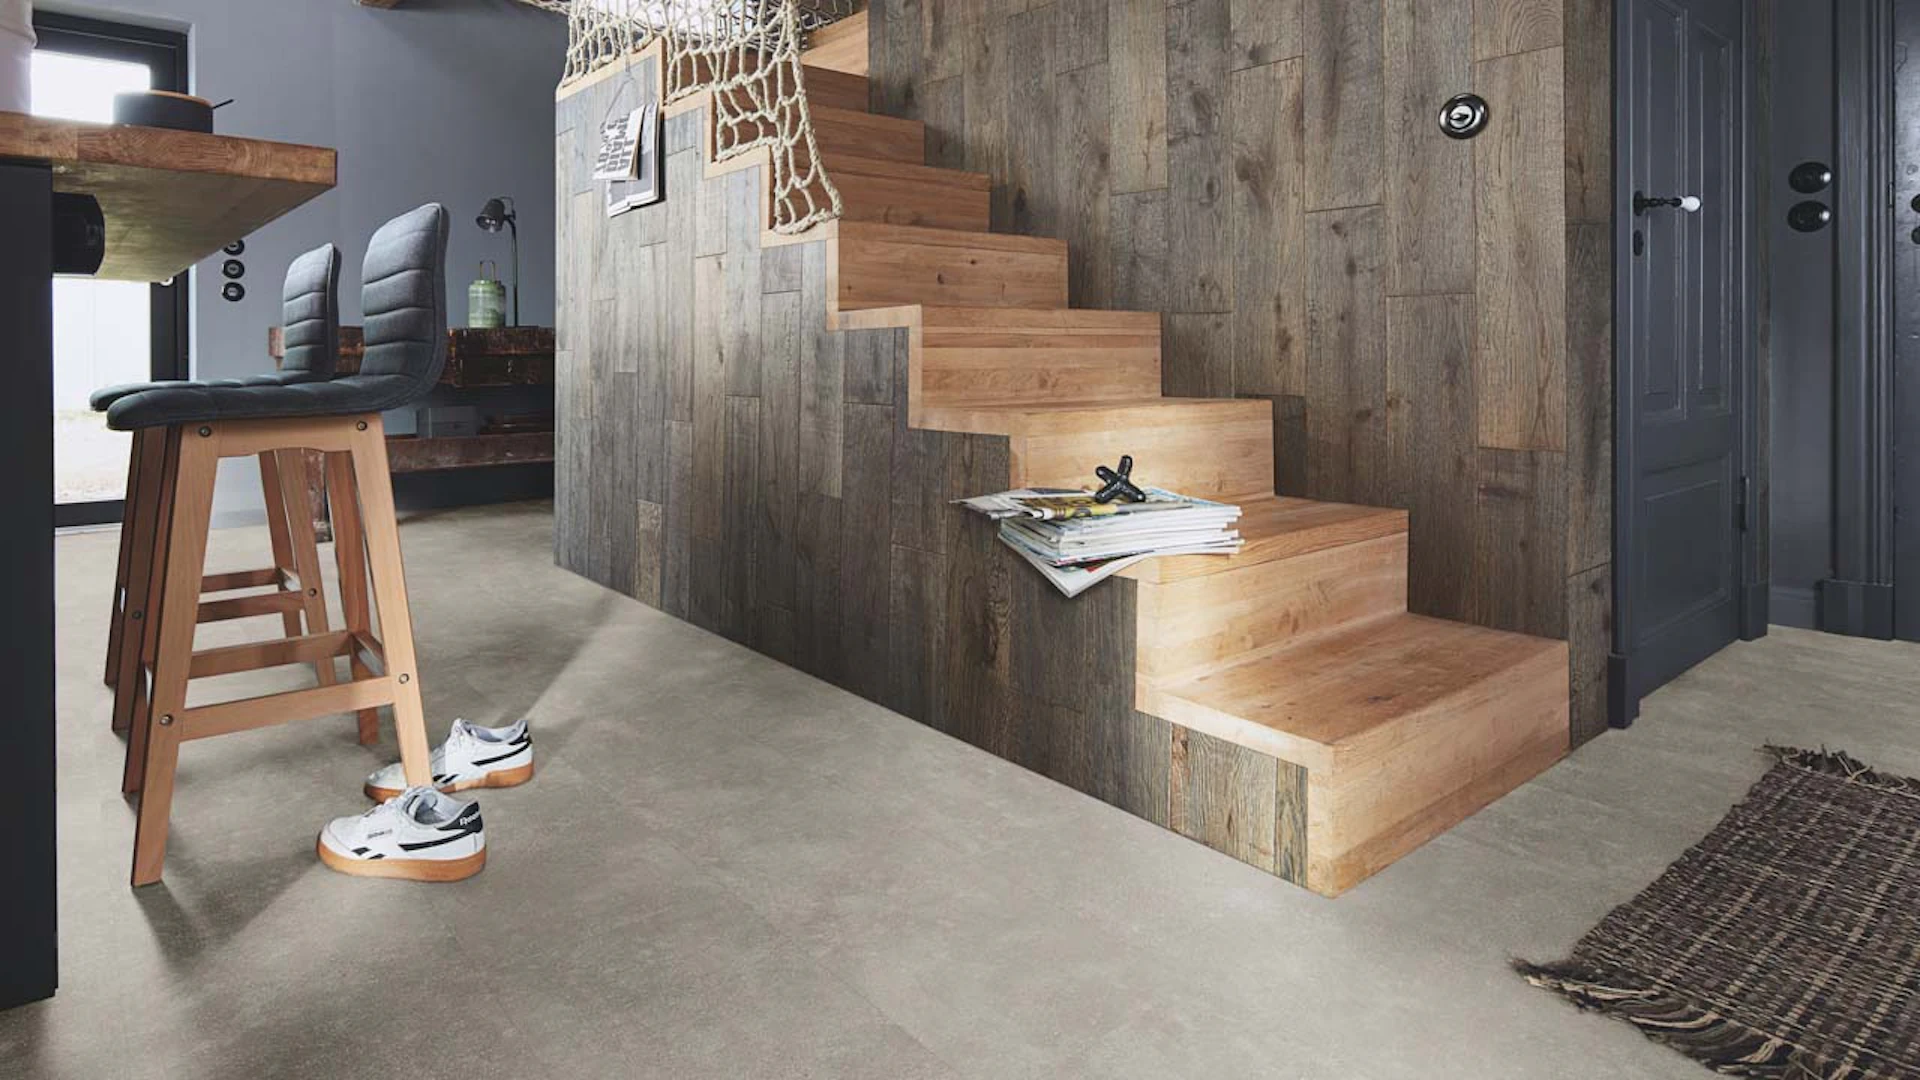 MEISTER Laminate - MeisterDesign LB 150 Mineral Stone 07137 | Made in Germany (600003-0857398-07137)